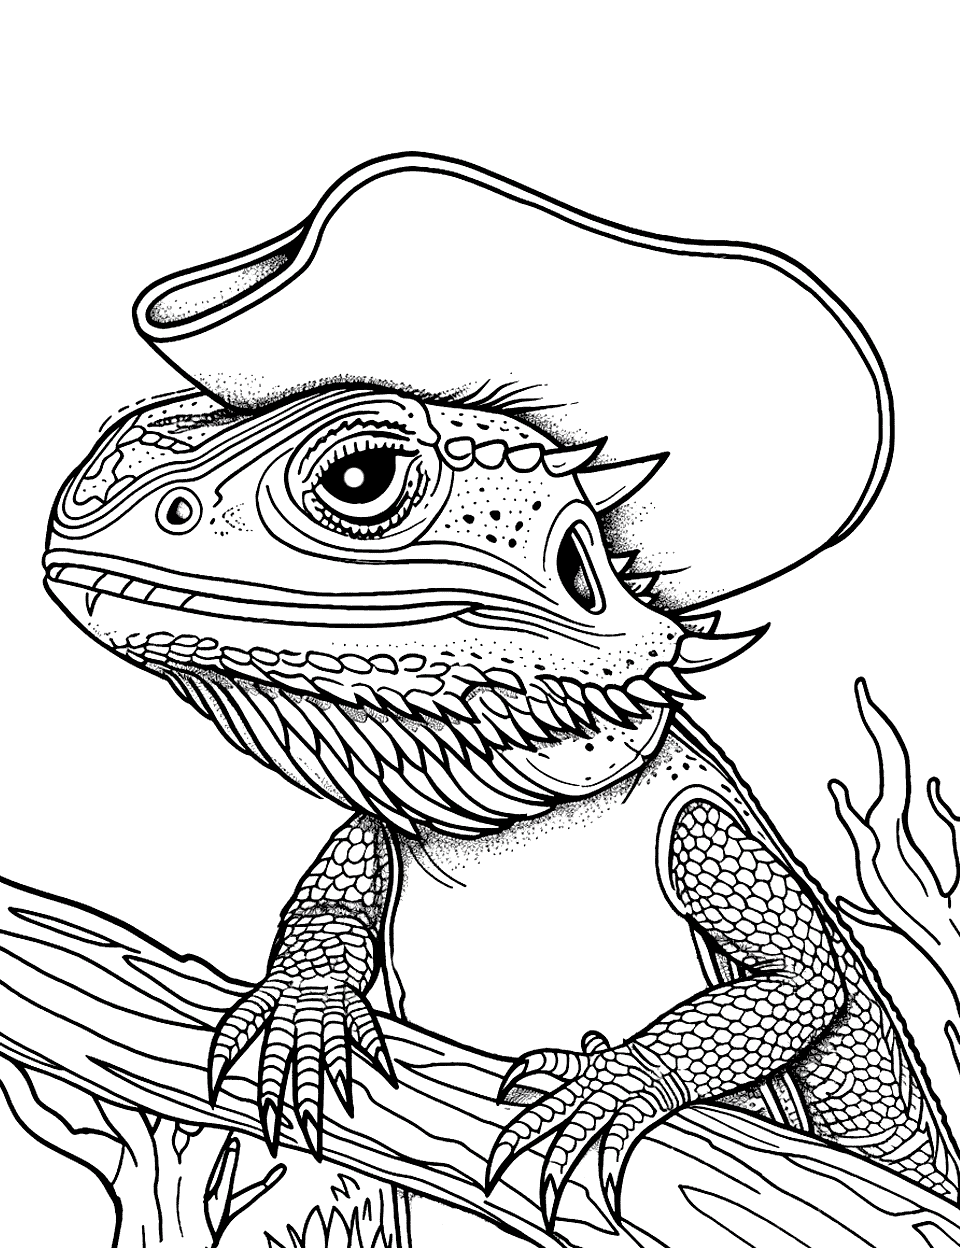 Bearded Dragon as a Pirate Lizard Coloring Page - A bearded dragon dressed up as a pirate with a pirate hat.